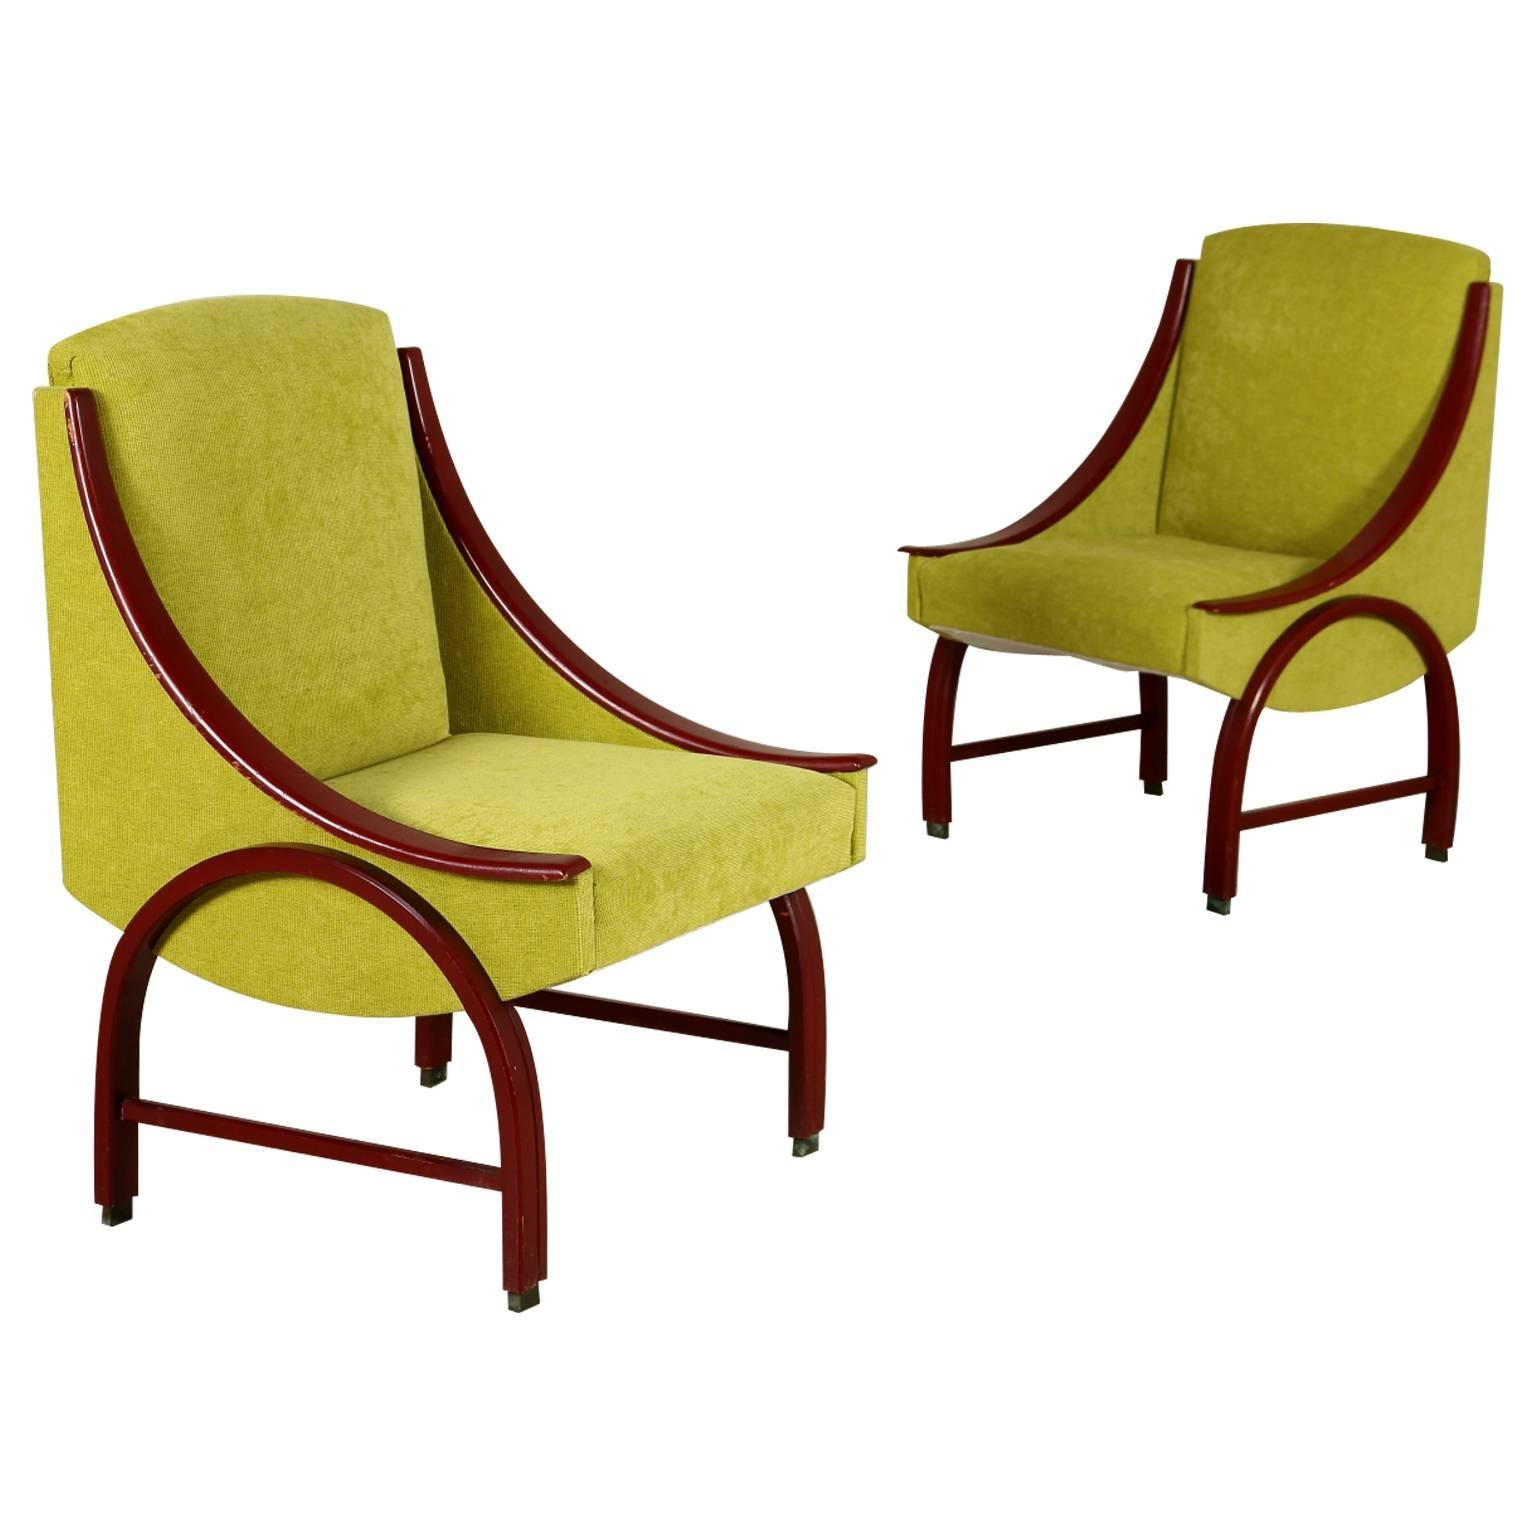 Two Armchairs Lacquered Bentwood Foam Padding Fabric Upholstery Vintage, 1960s